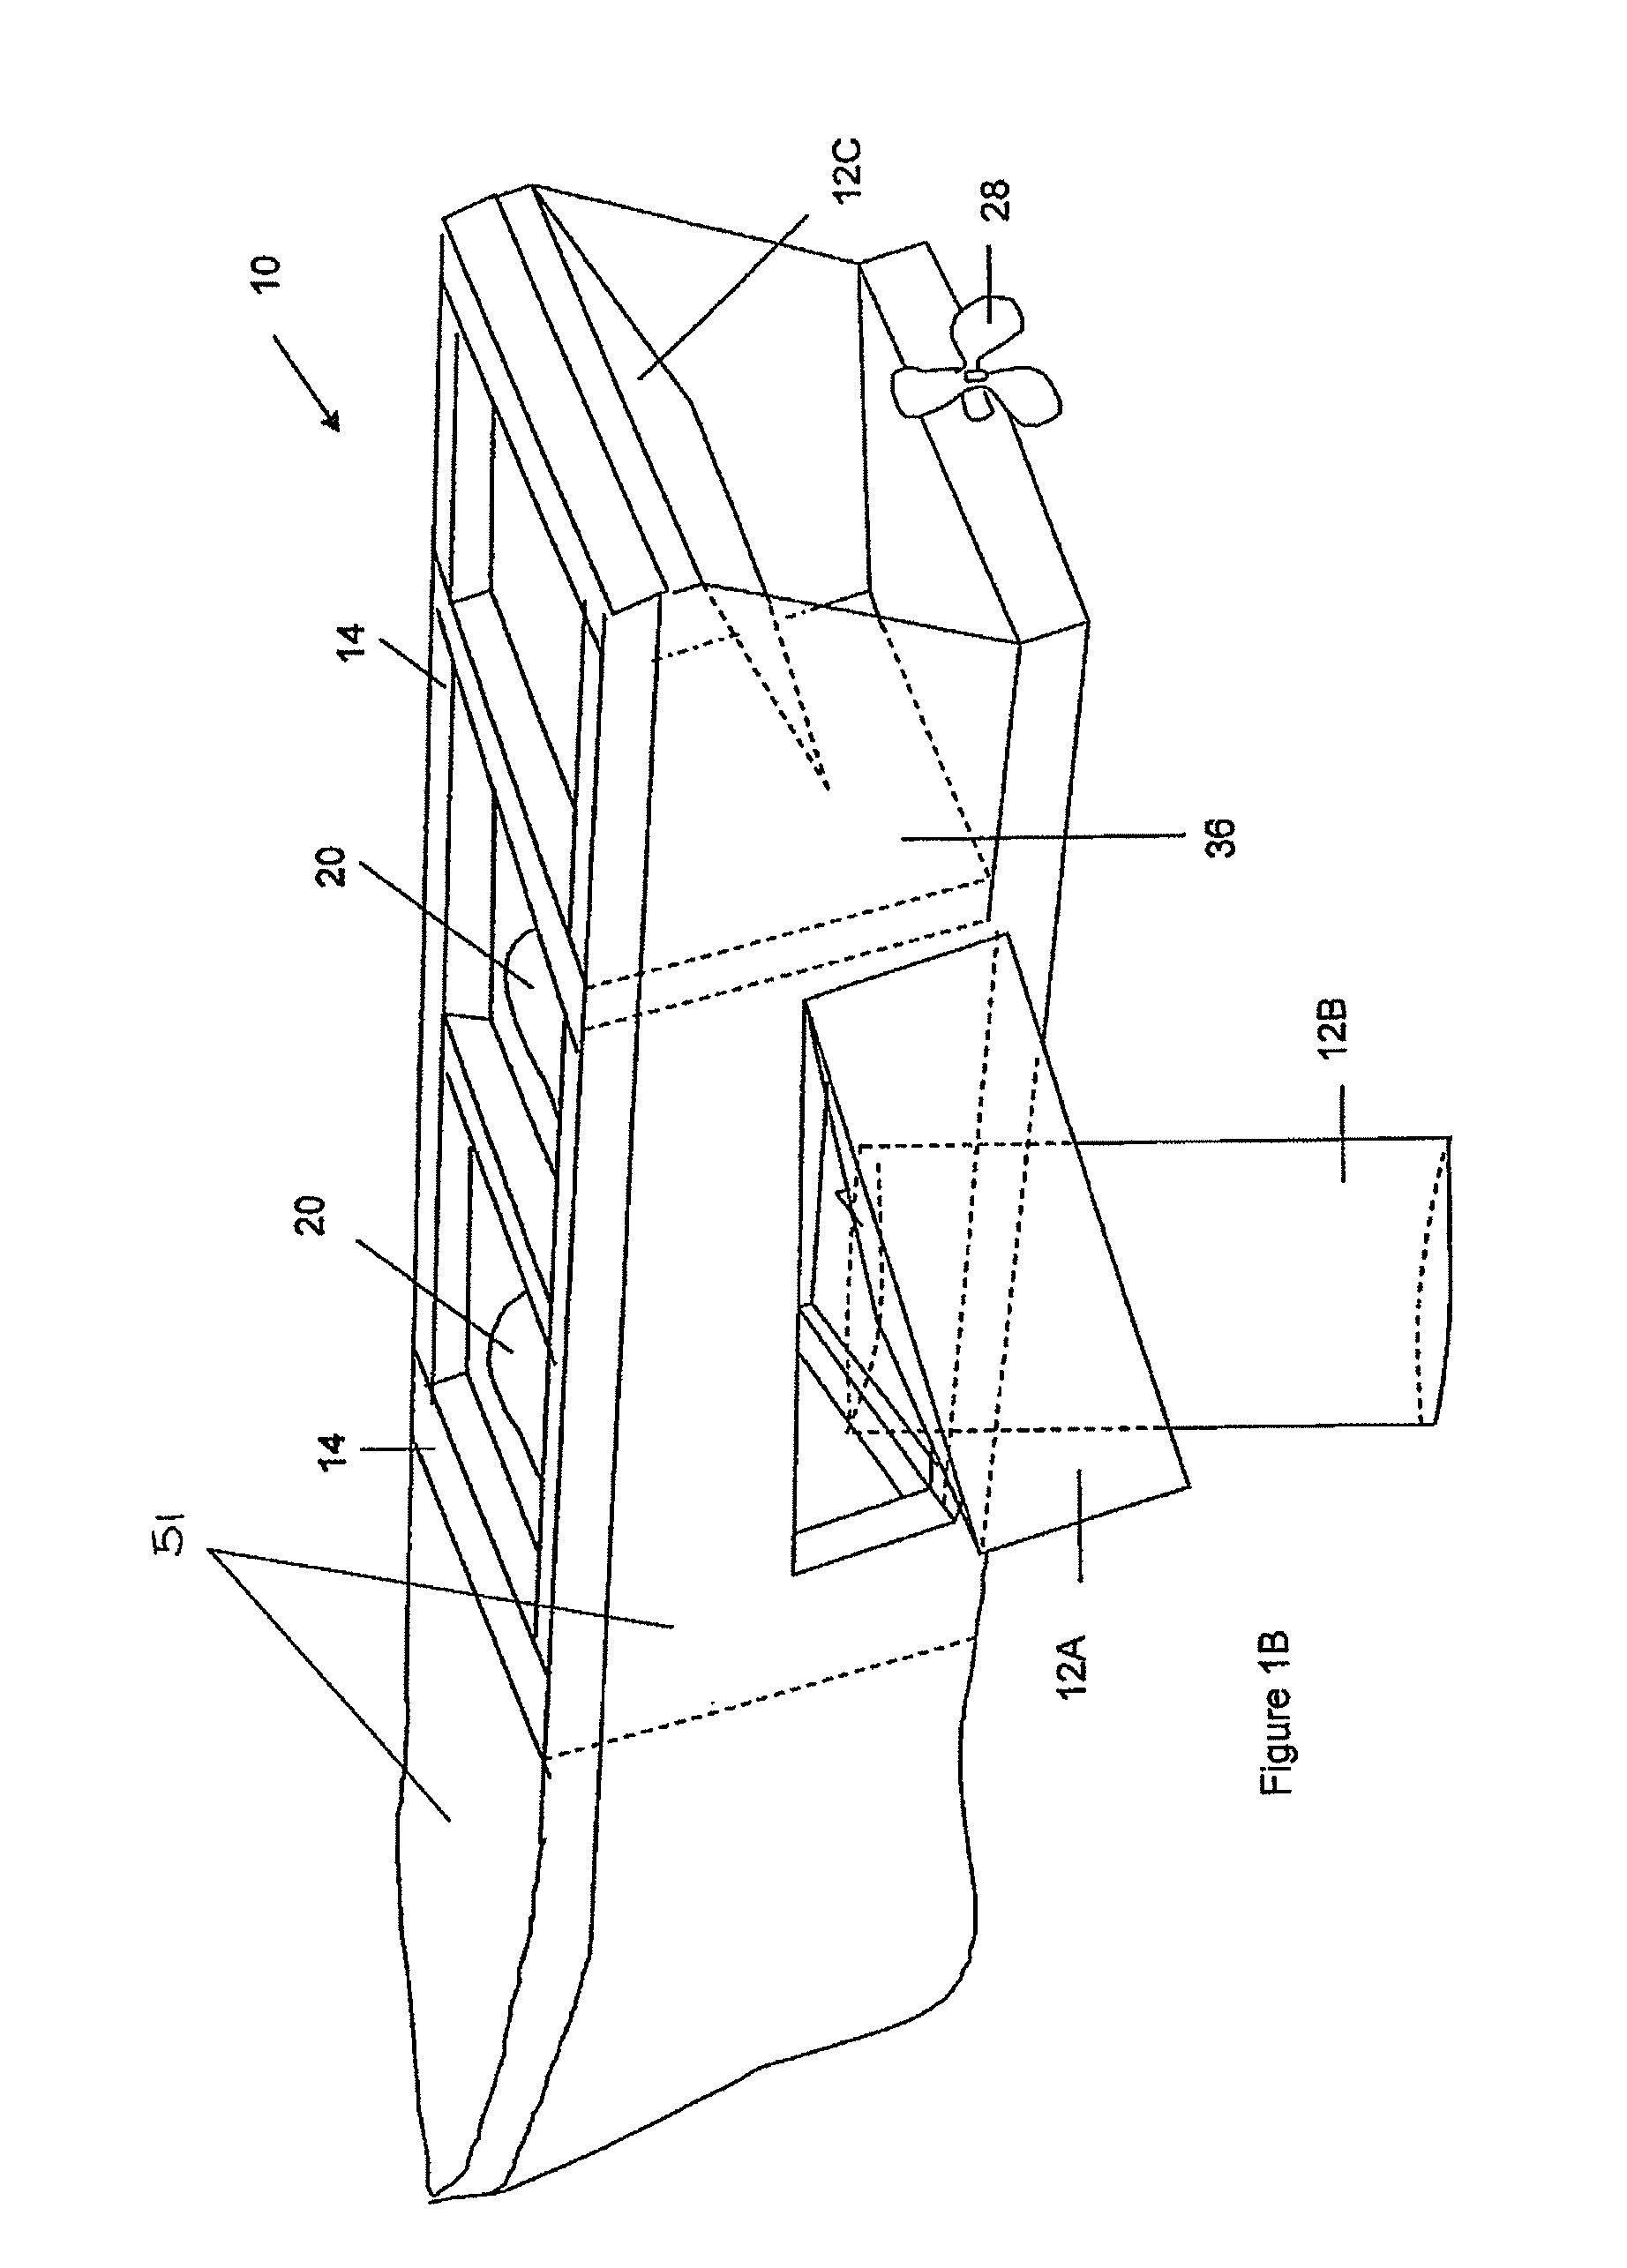 Method for changing the direction of travel of a watercraft and apparatus therefor